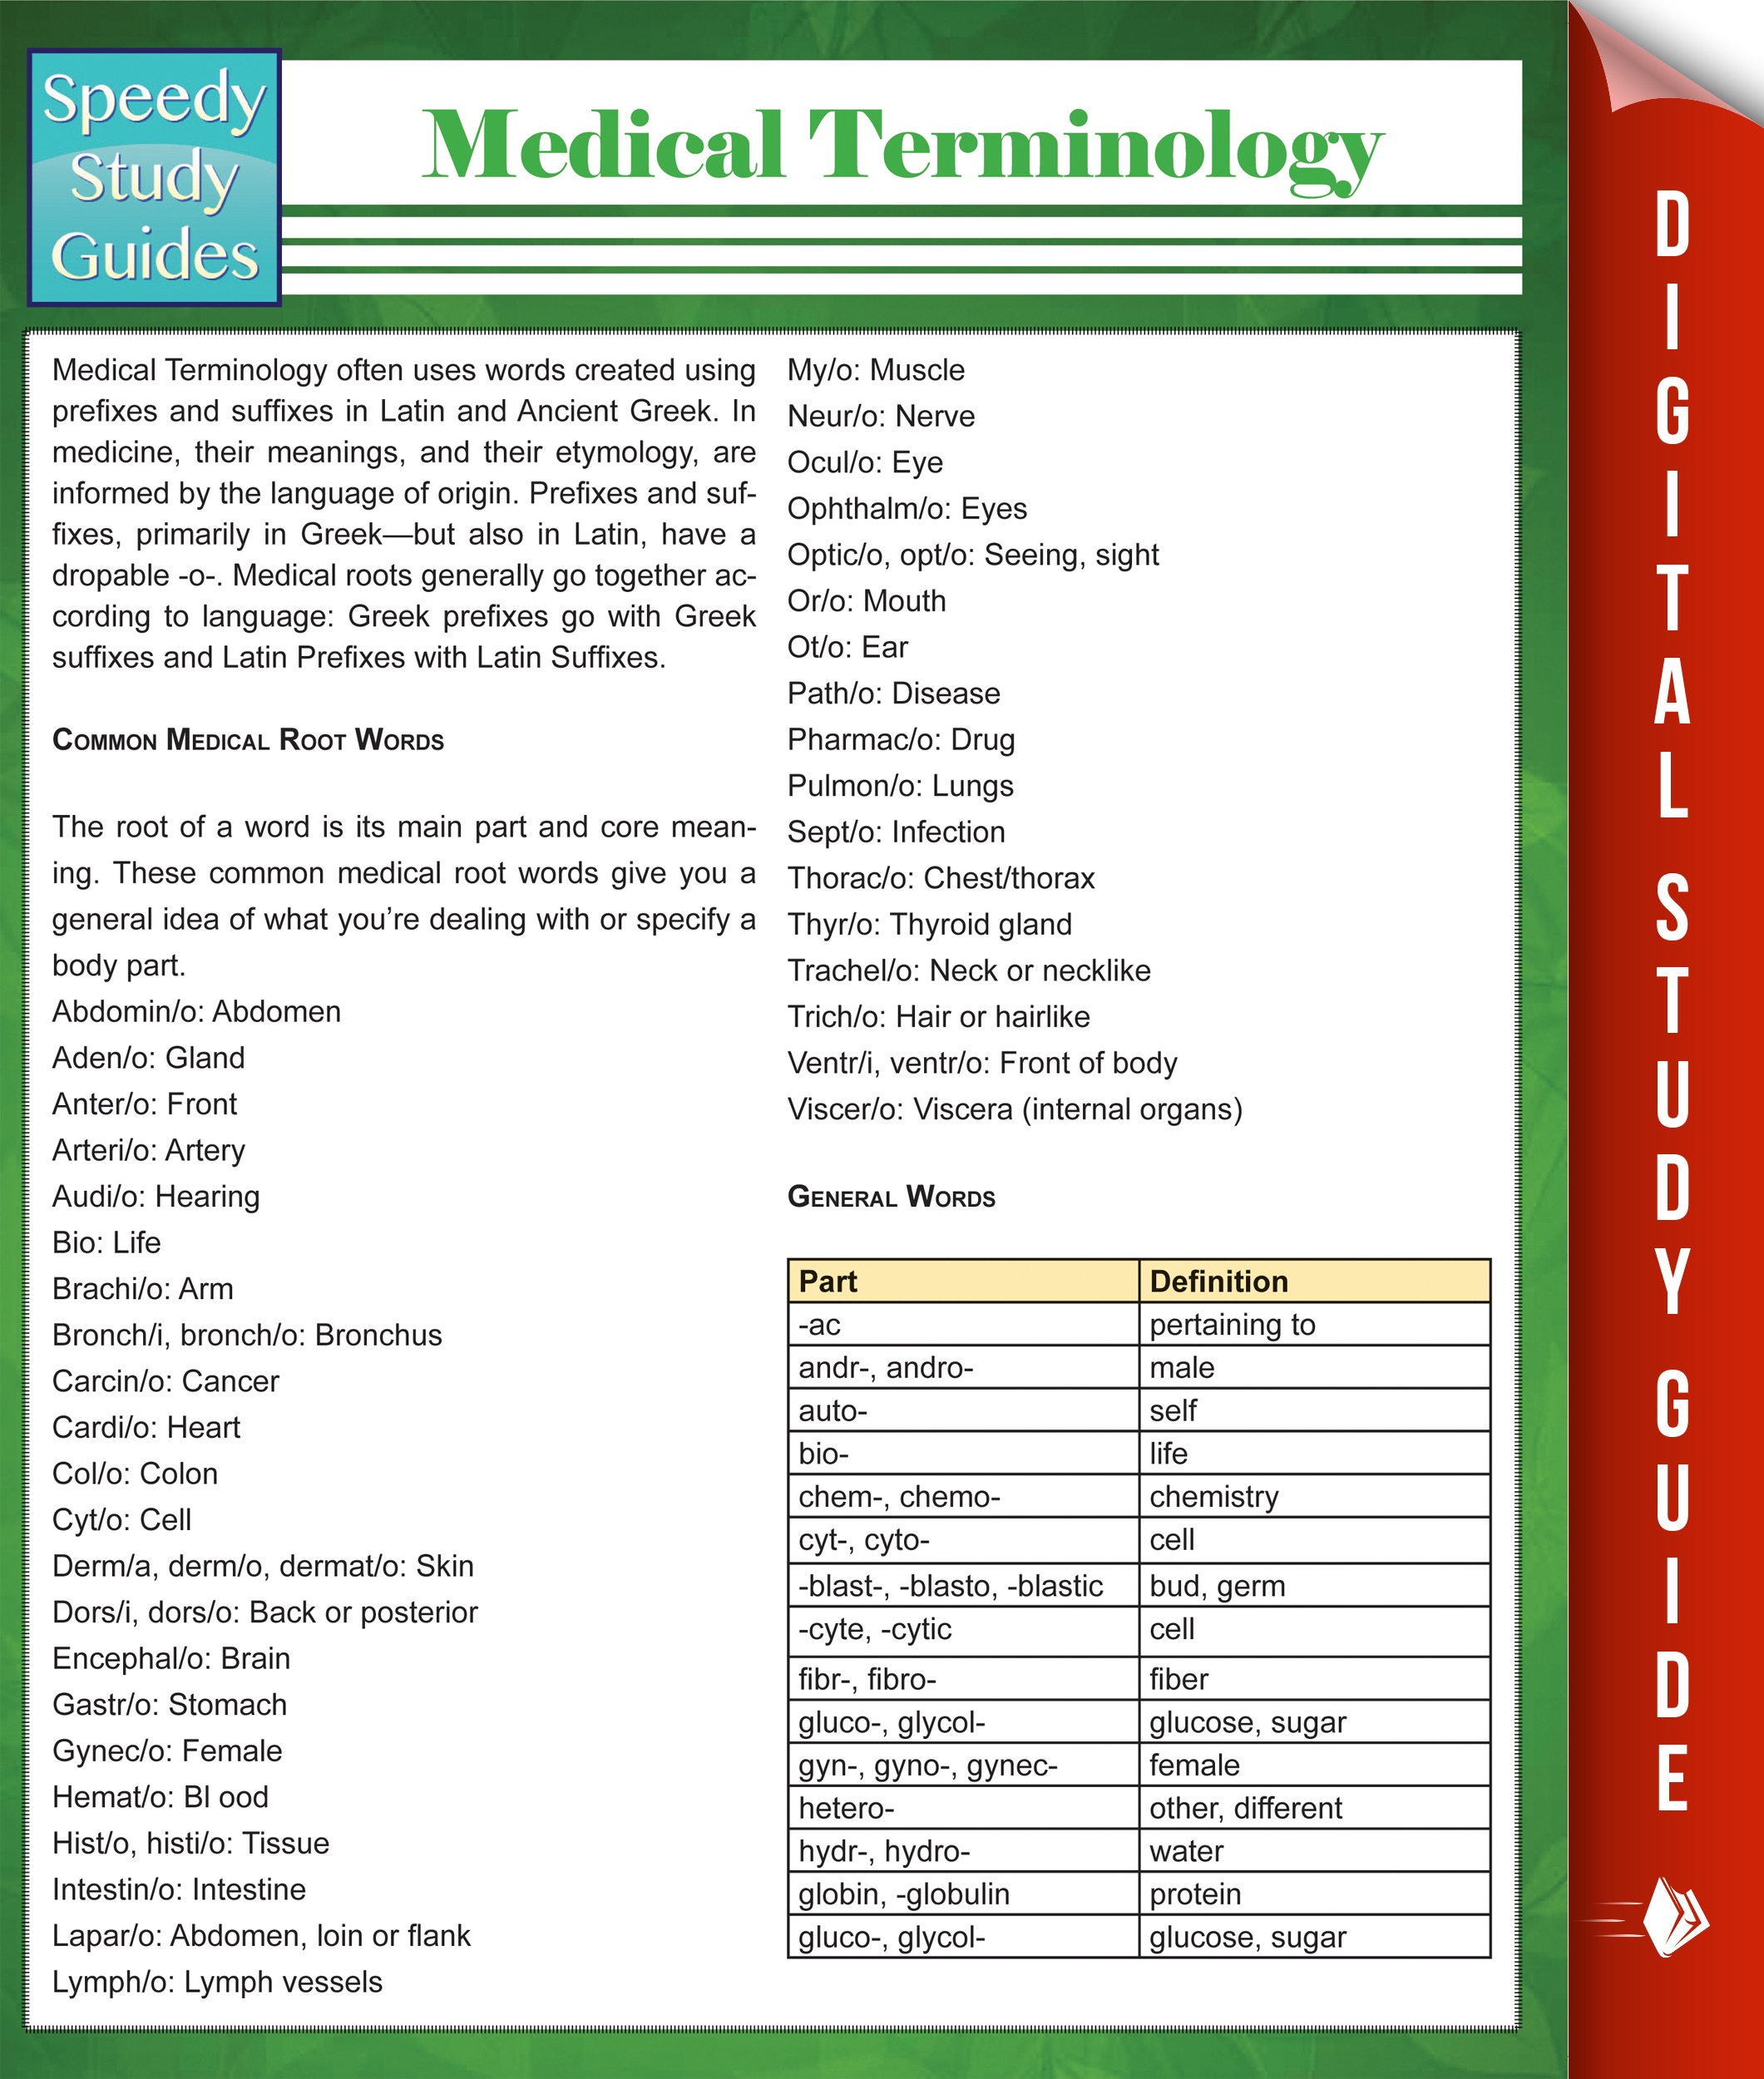 Medical Terminology (Speedy Study Guides) by Speedy Publishing on iBooks